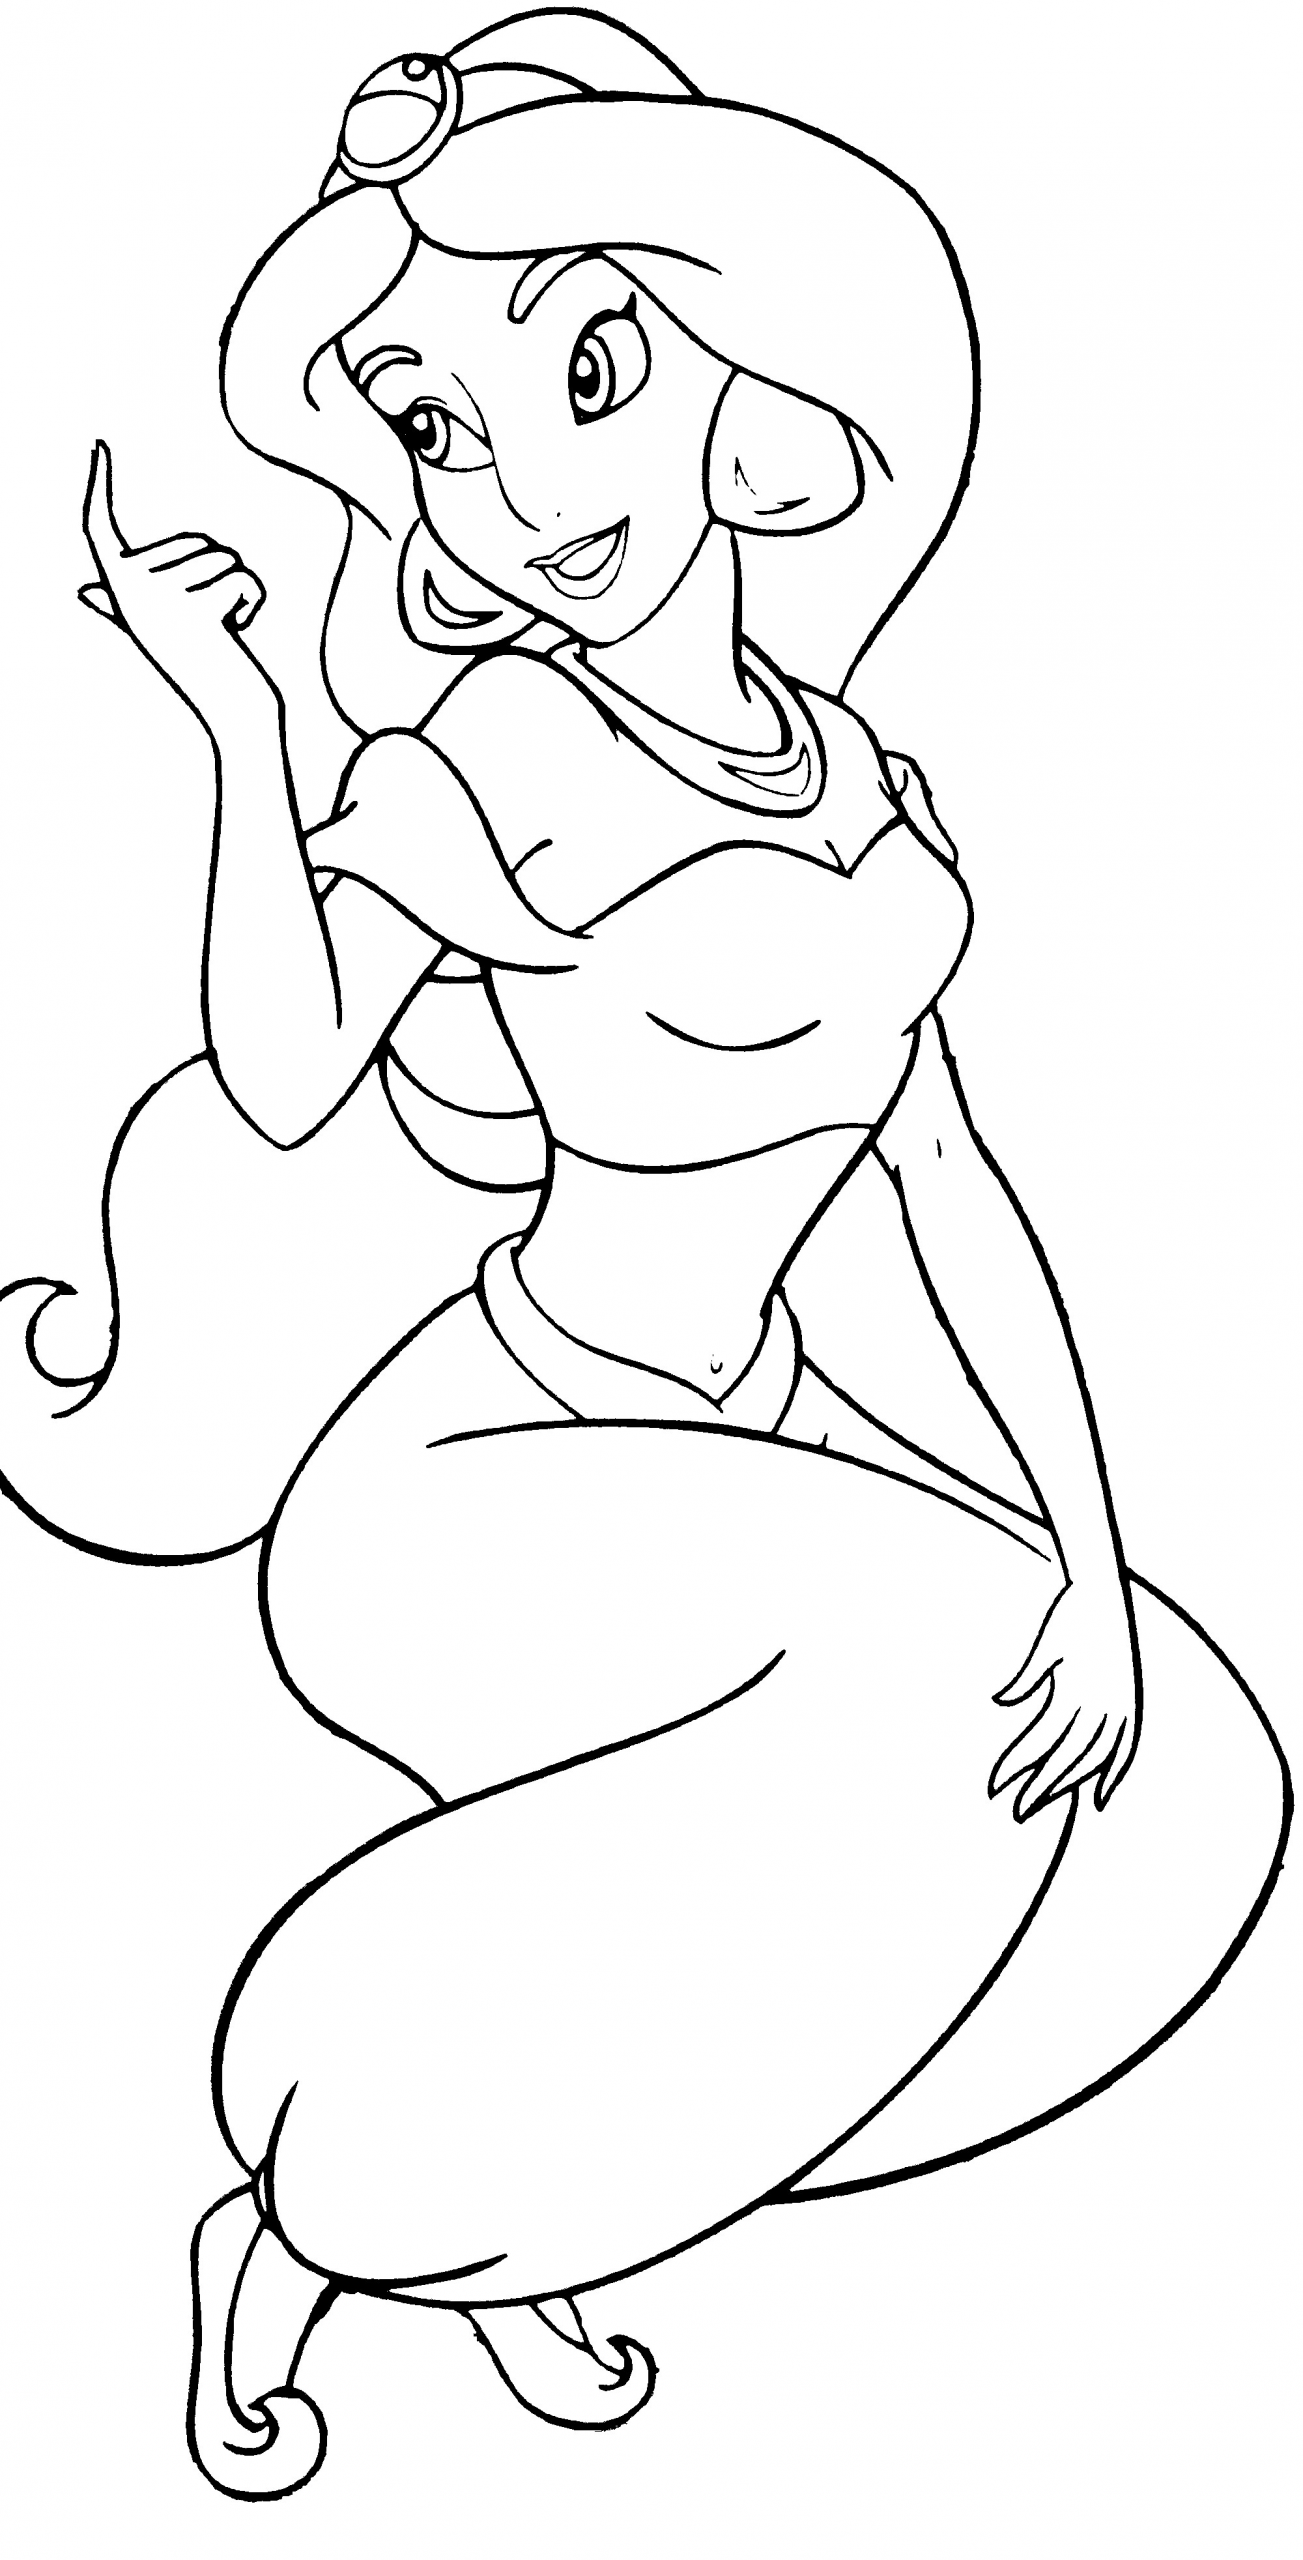 Disney Princess Printable Coloring Pages
 1000 images about PAGES on Pinterest